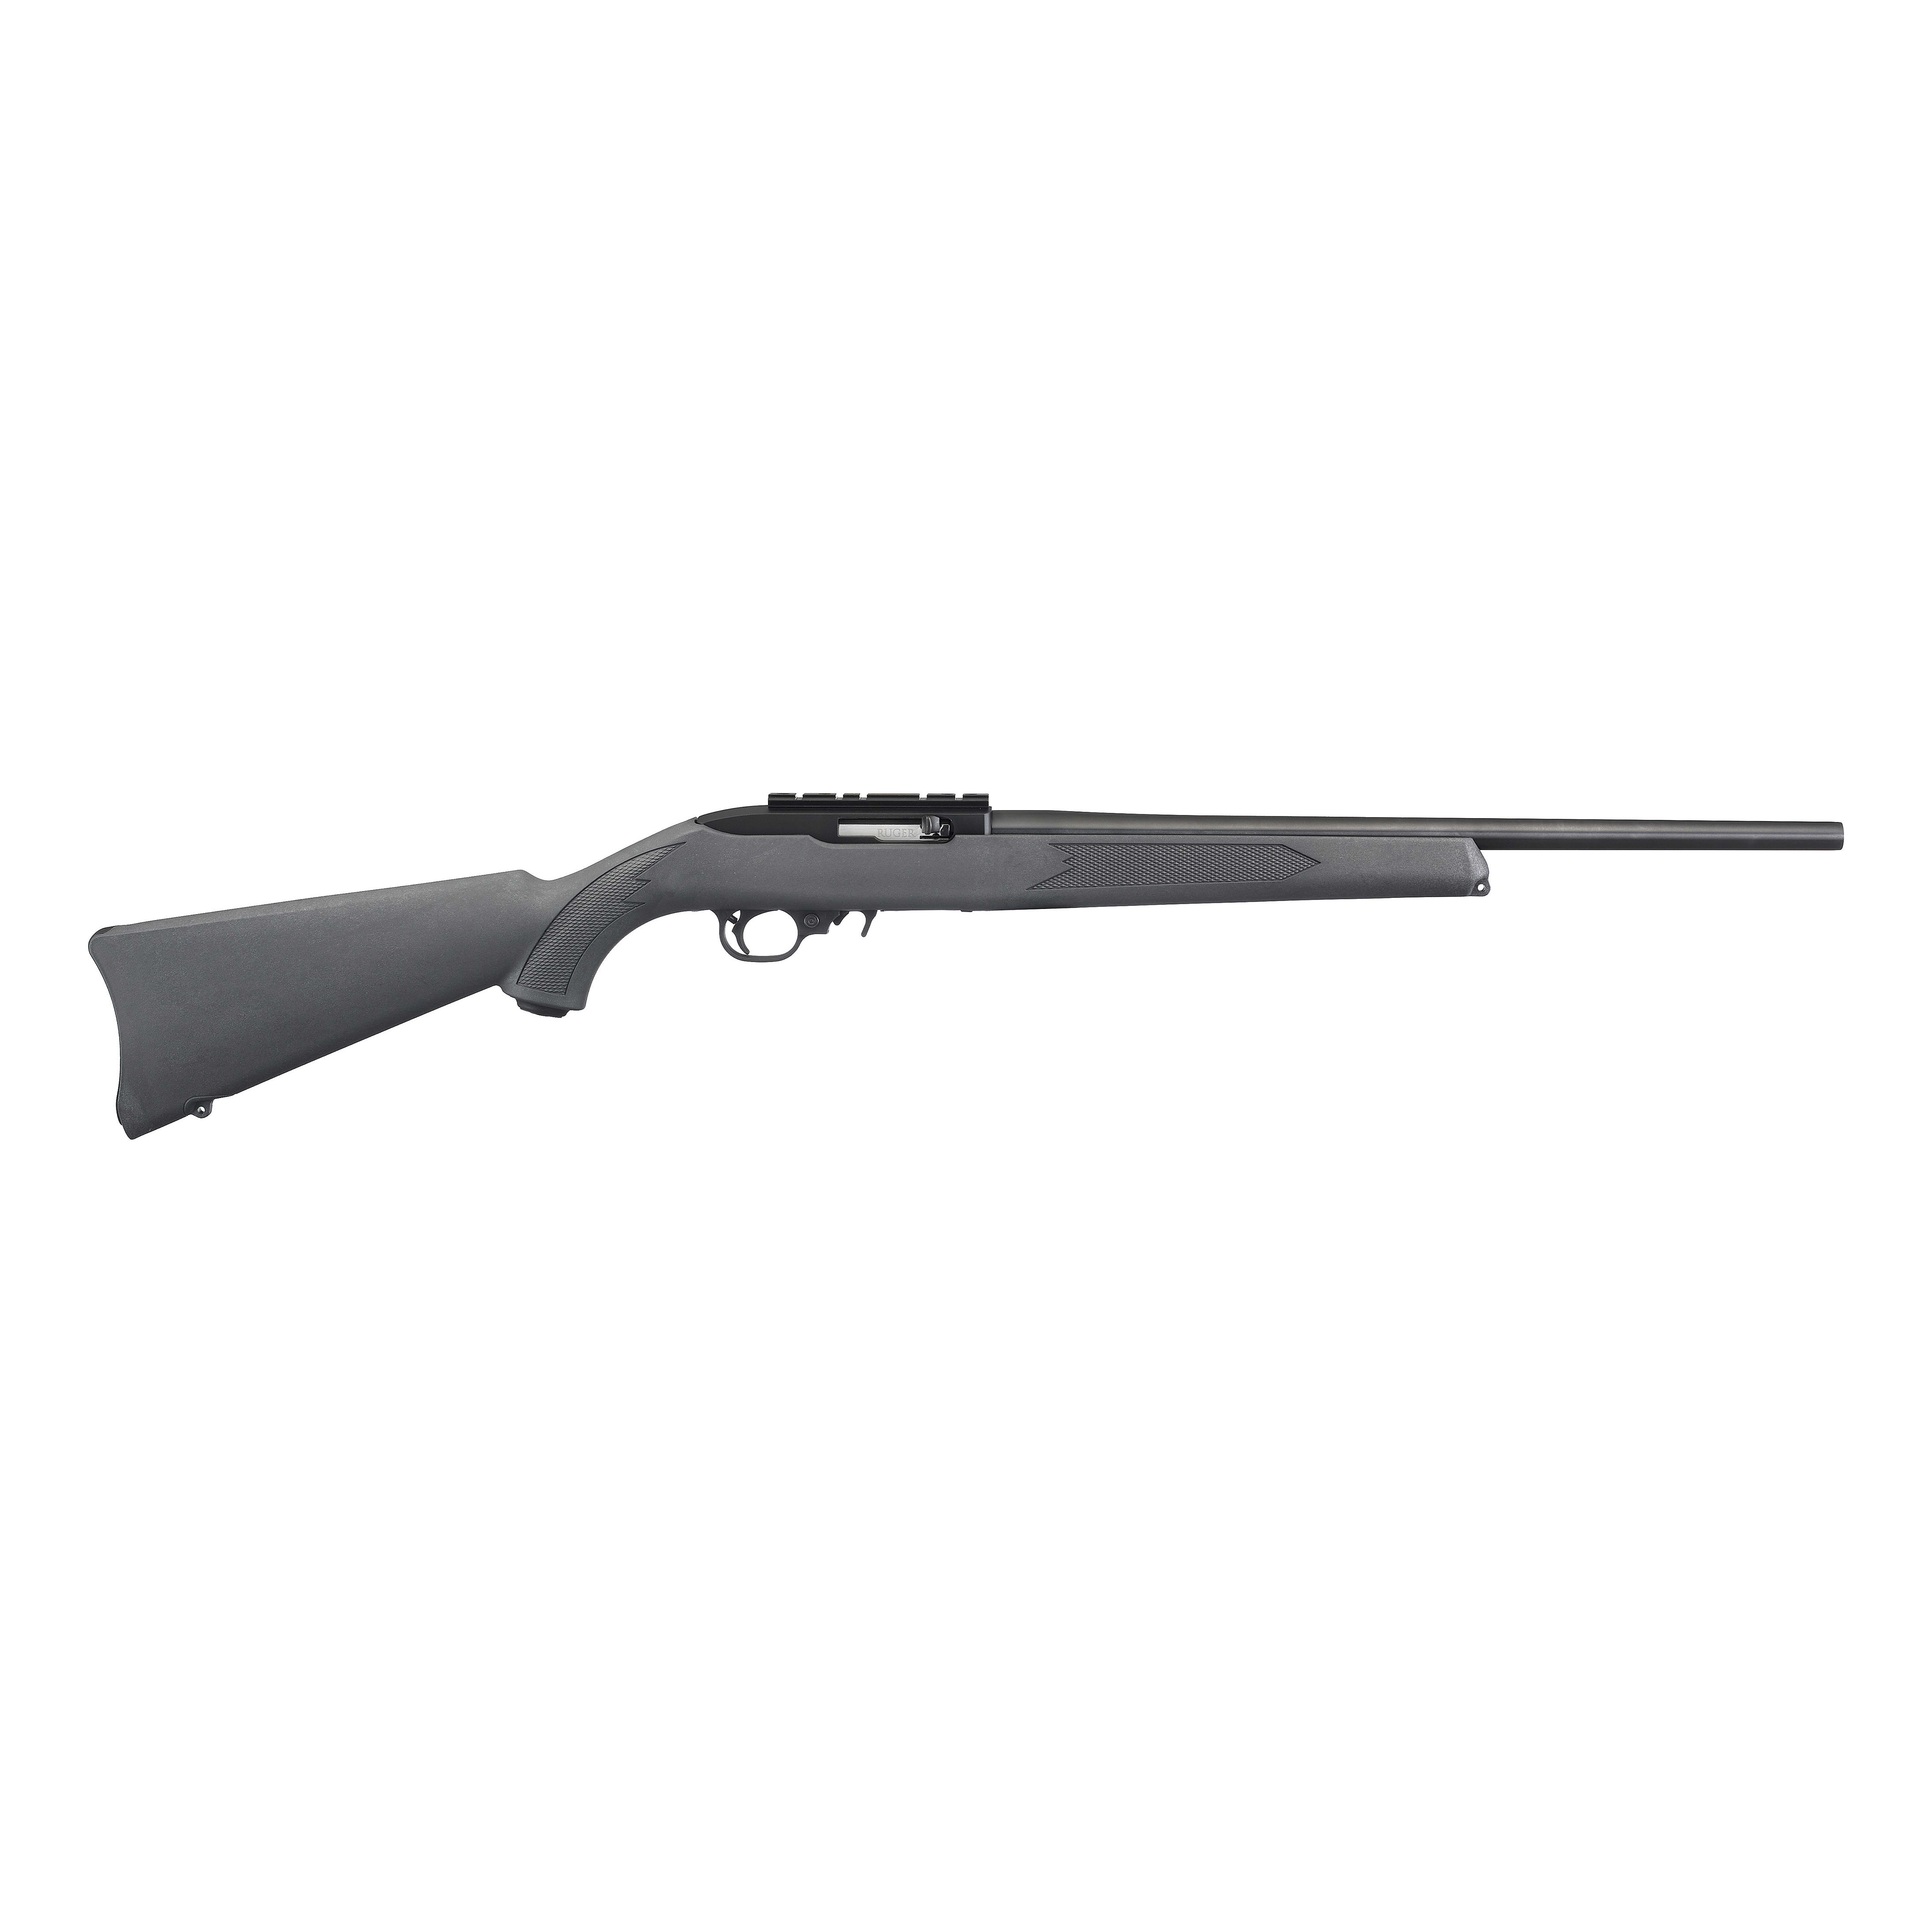 Ruger® 10/22® Carbine Semi-Auto Rifle - Charcoal